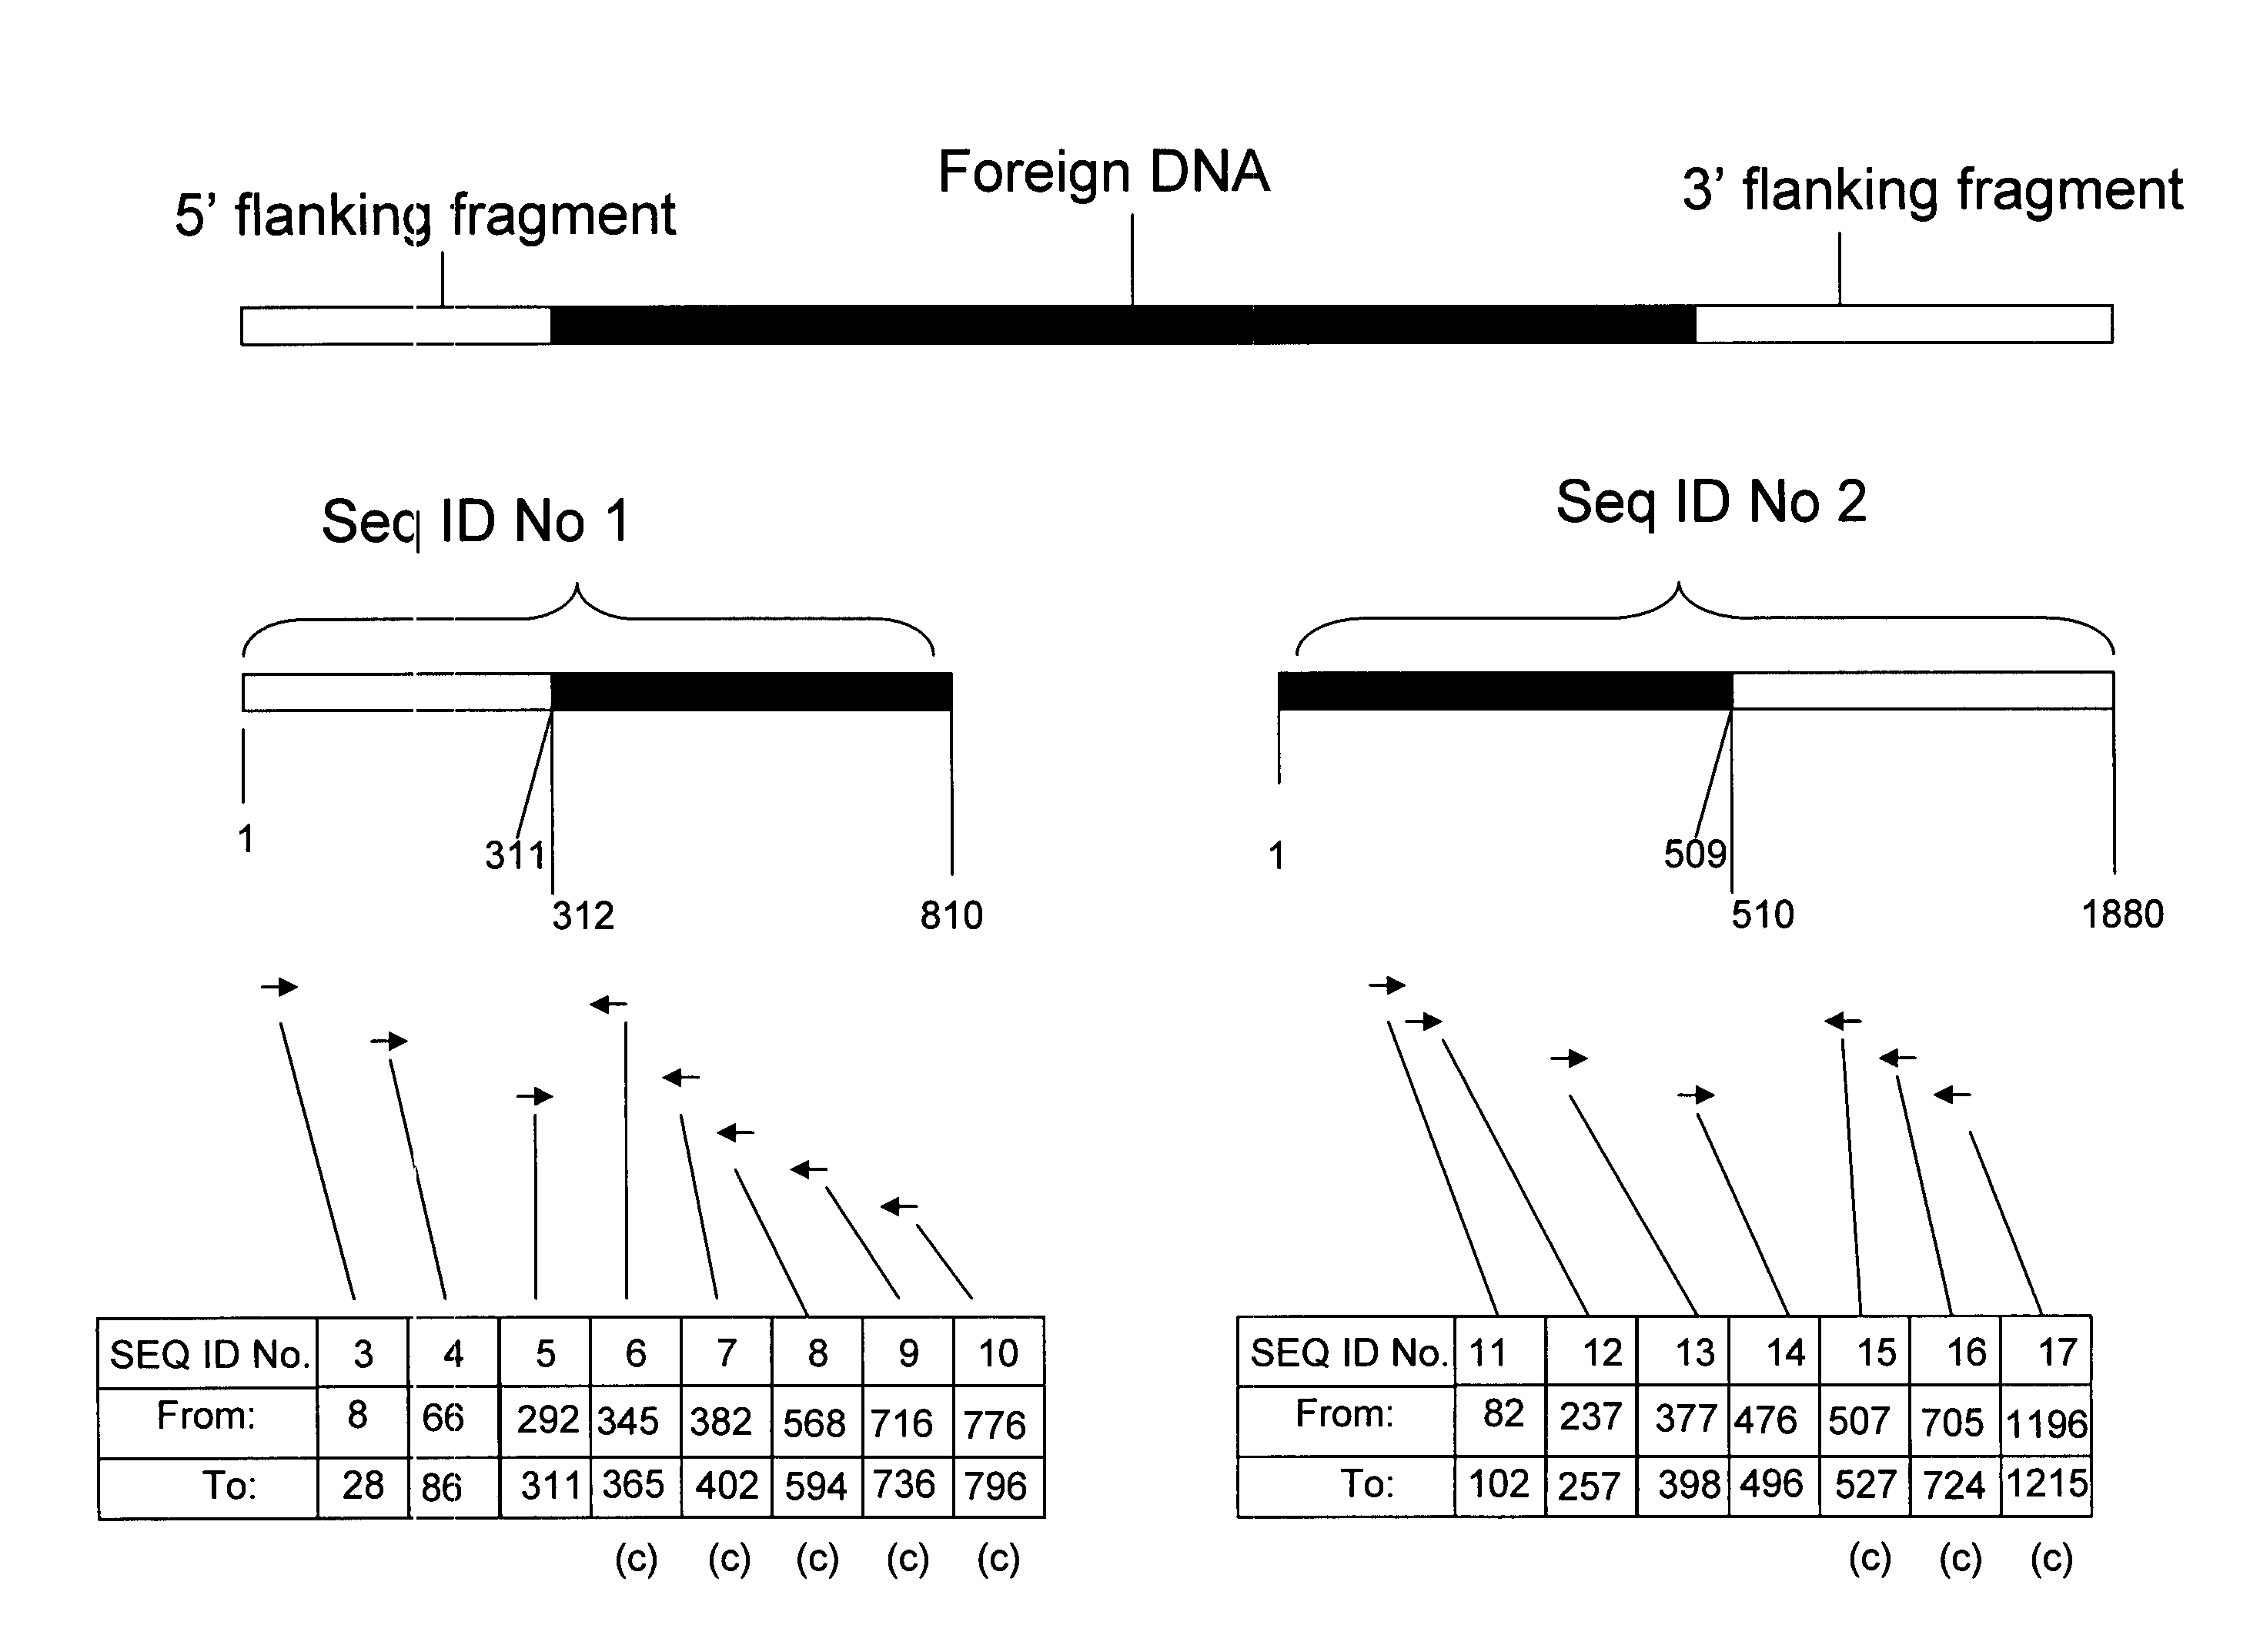 Elite event A5547-127 and methods and kits for identifying such event in biological samples